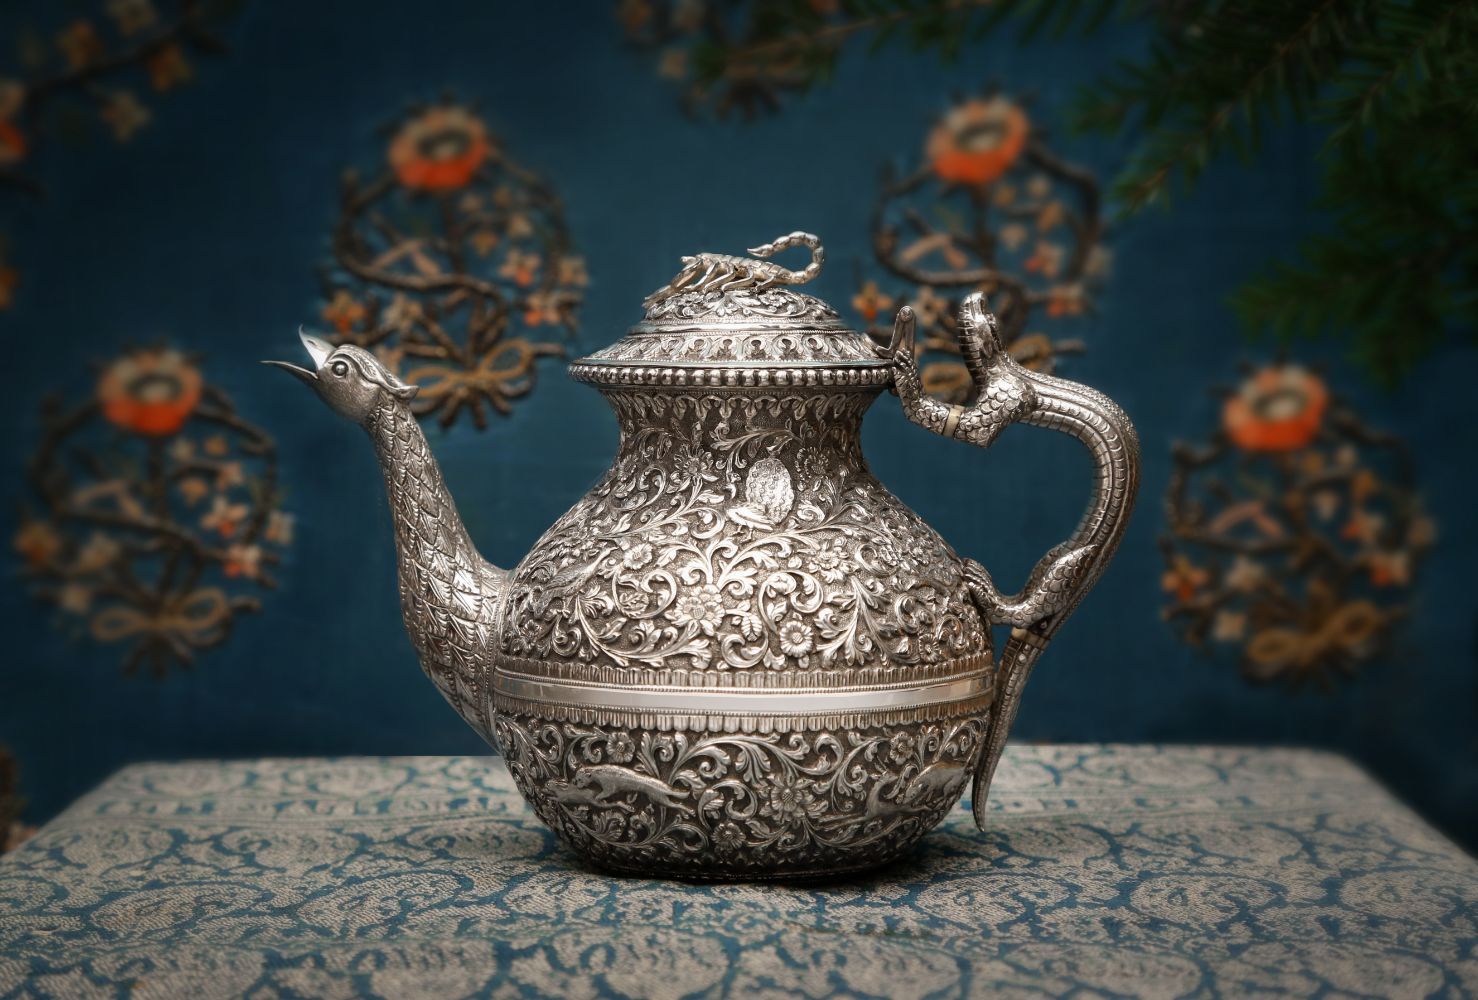 The Stewart Collection of Indian and Burmese Silver